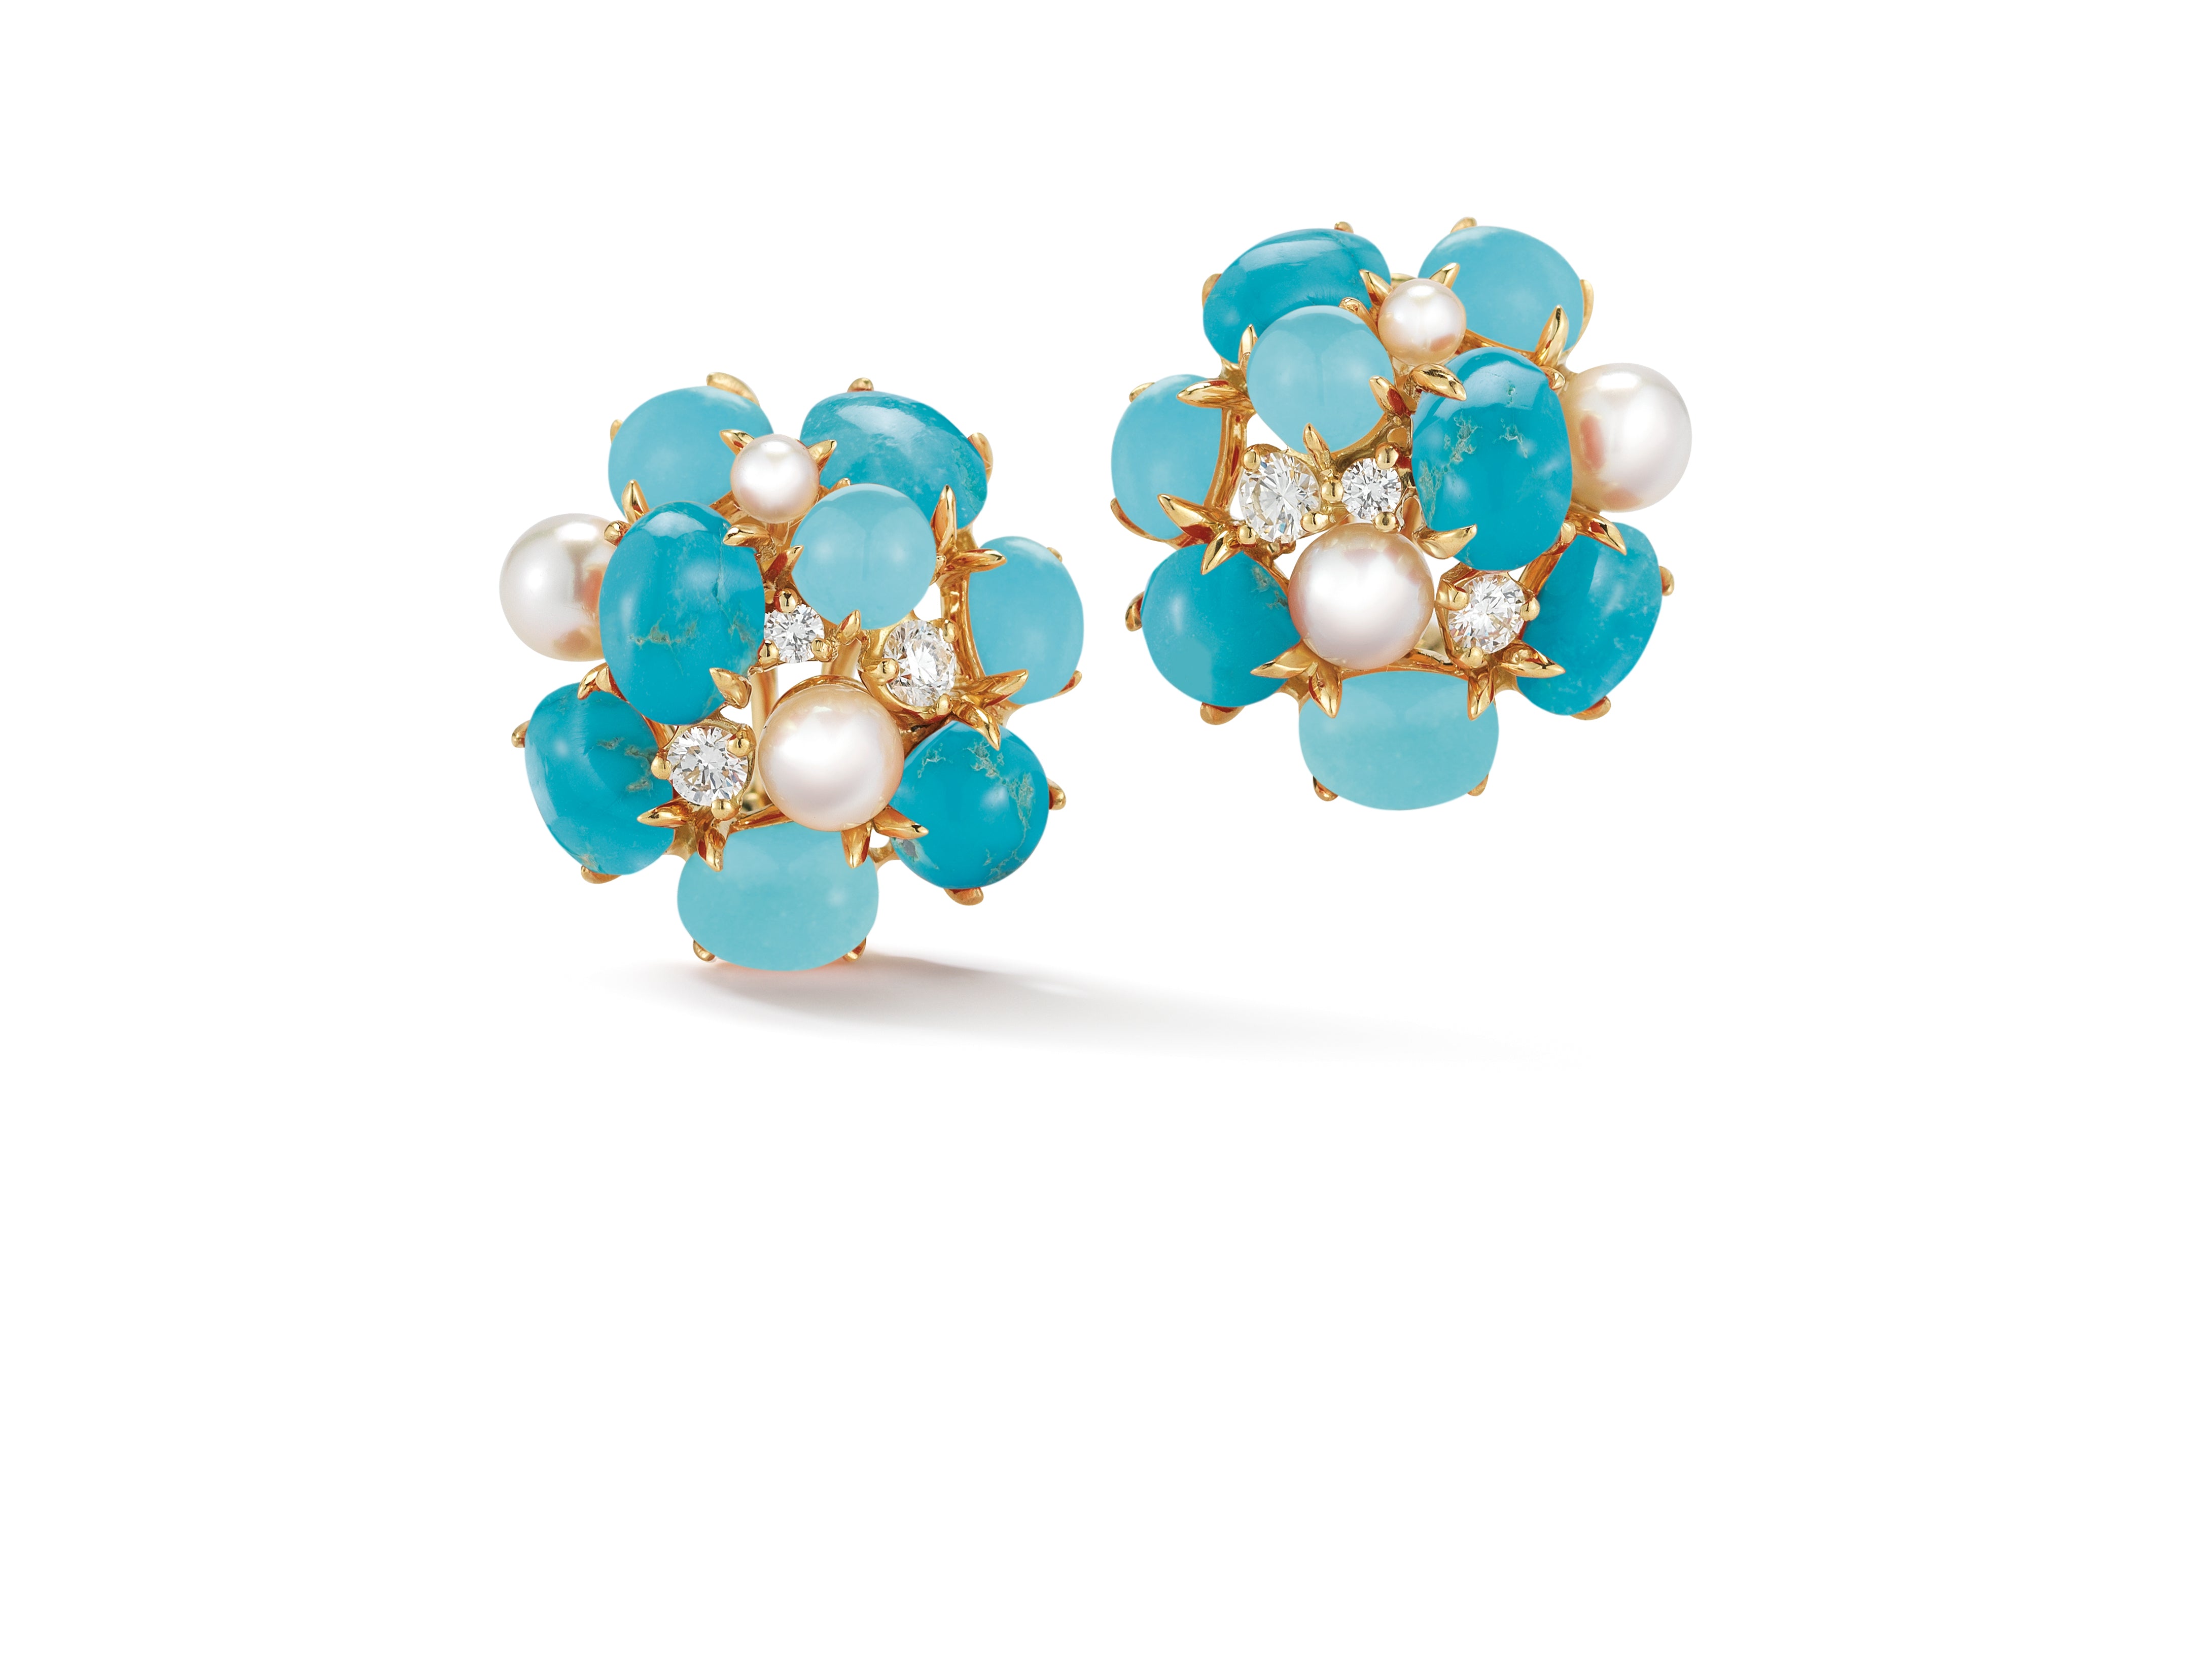 A pair of Bubble Earrings with Turquoise, Pearl, and Diamond set in 18K Yellow Gold. Signed Seaman Schepps.